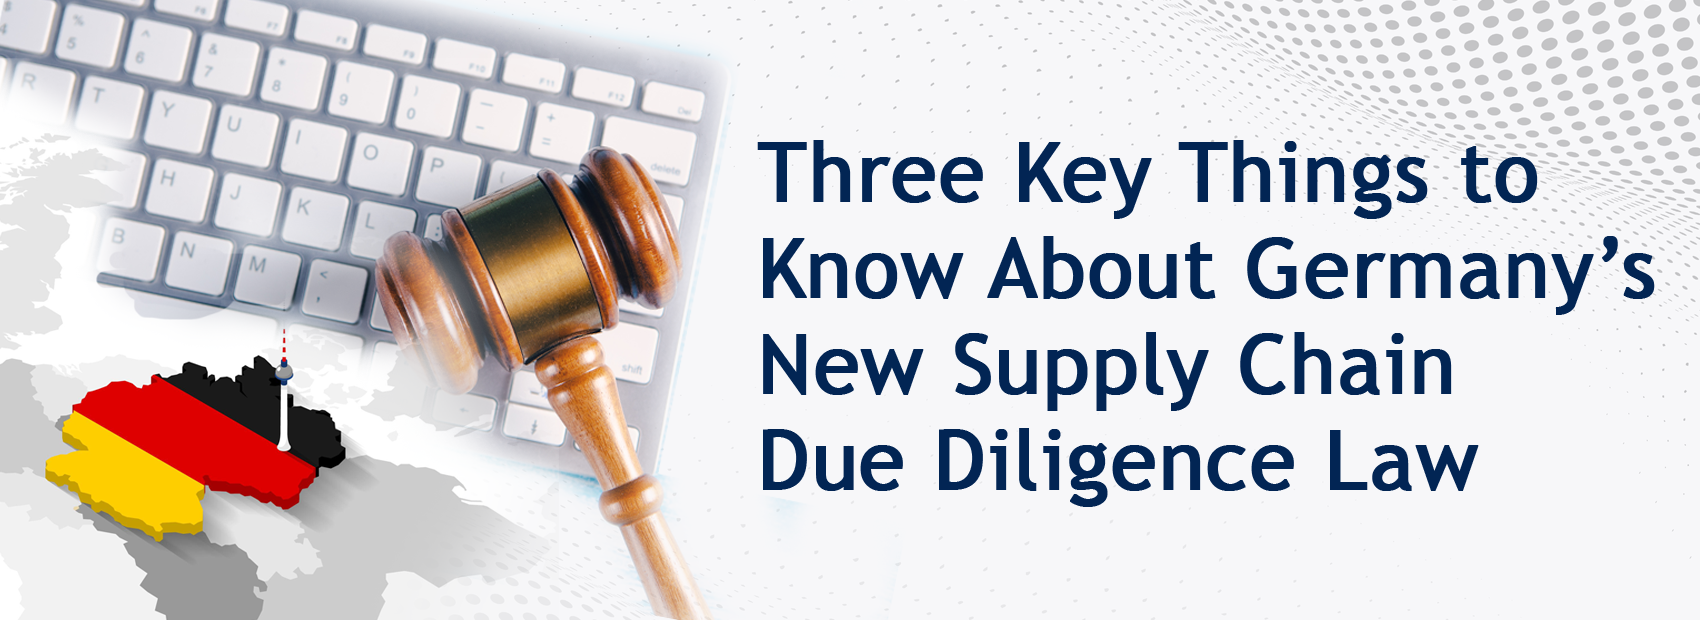 Supply Chain Due Diligence Law